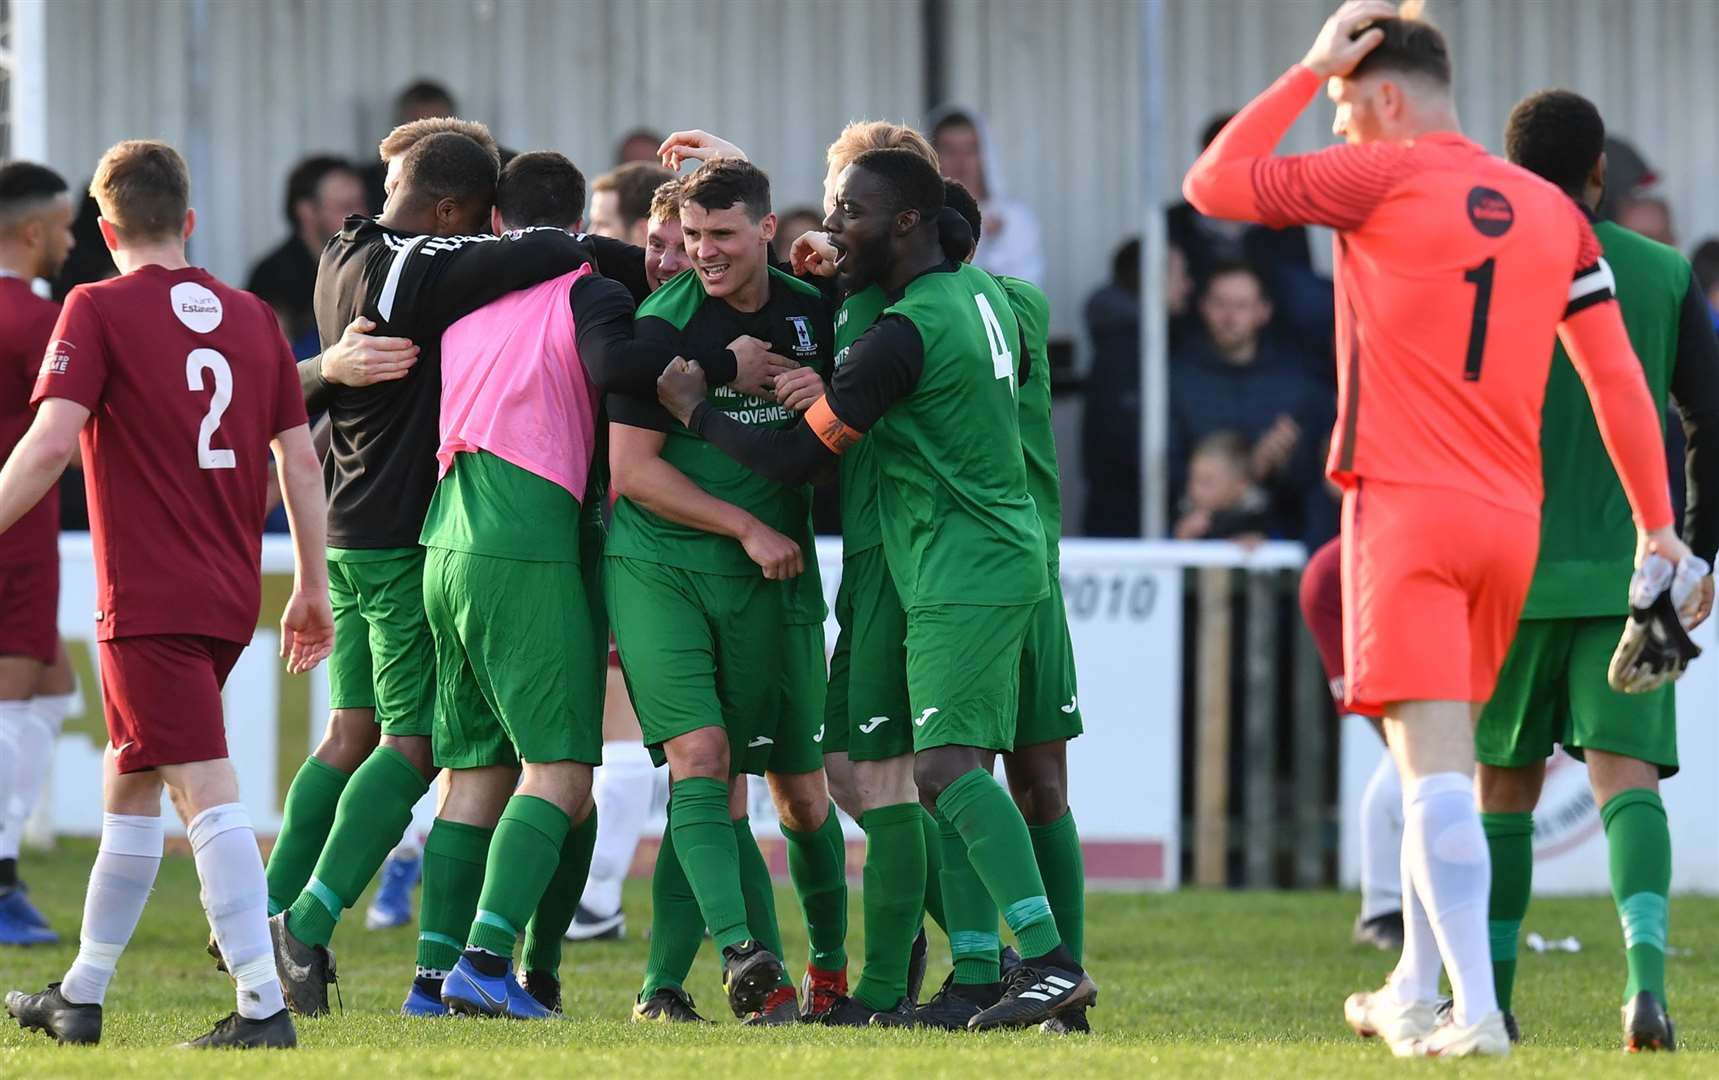 Jack Delo, right, walks off as Cray's players celebrate at the final whistle at Salters Lane on Saturday Picture: Keith Gillard